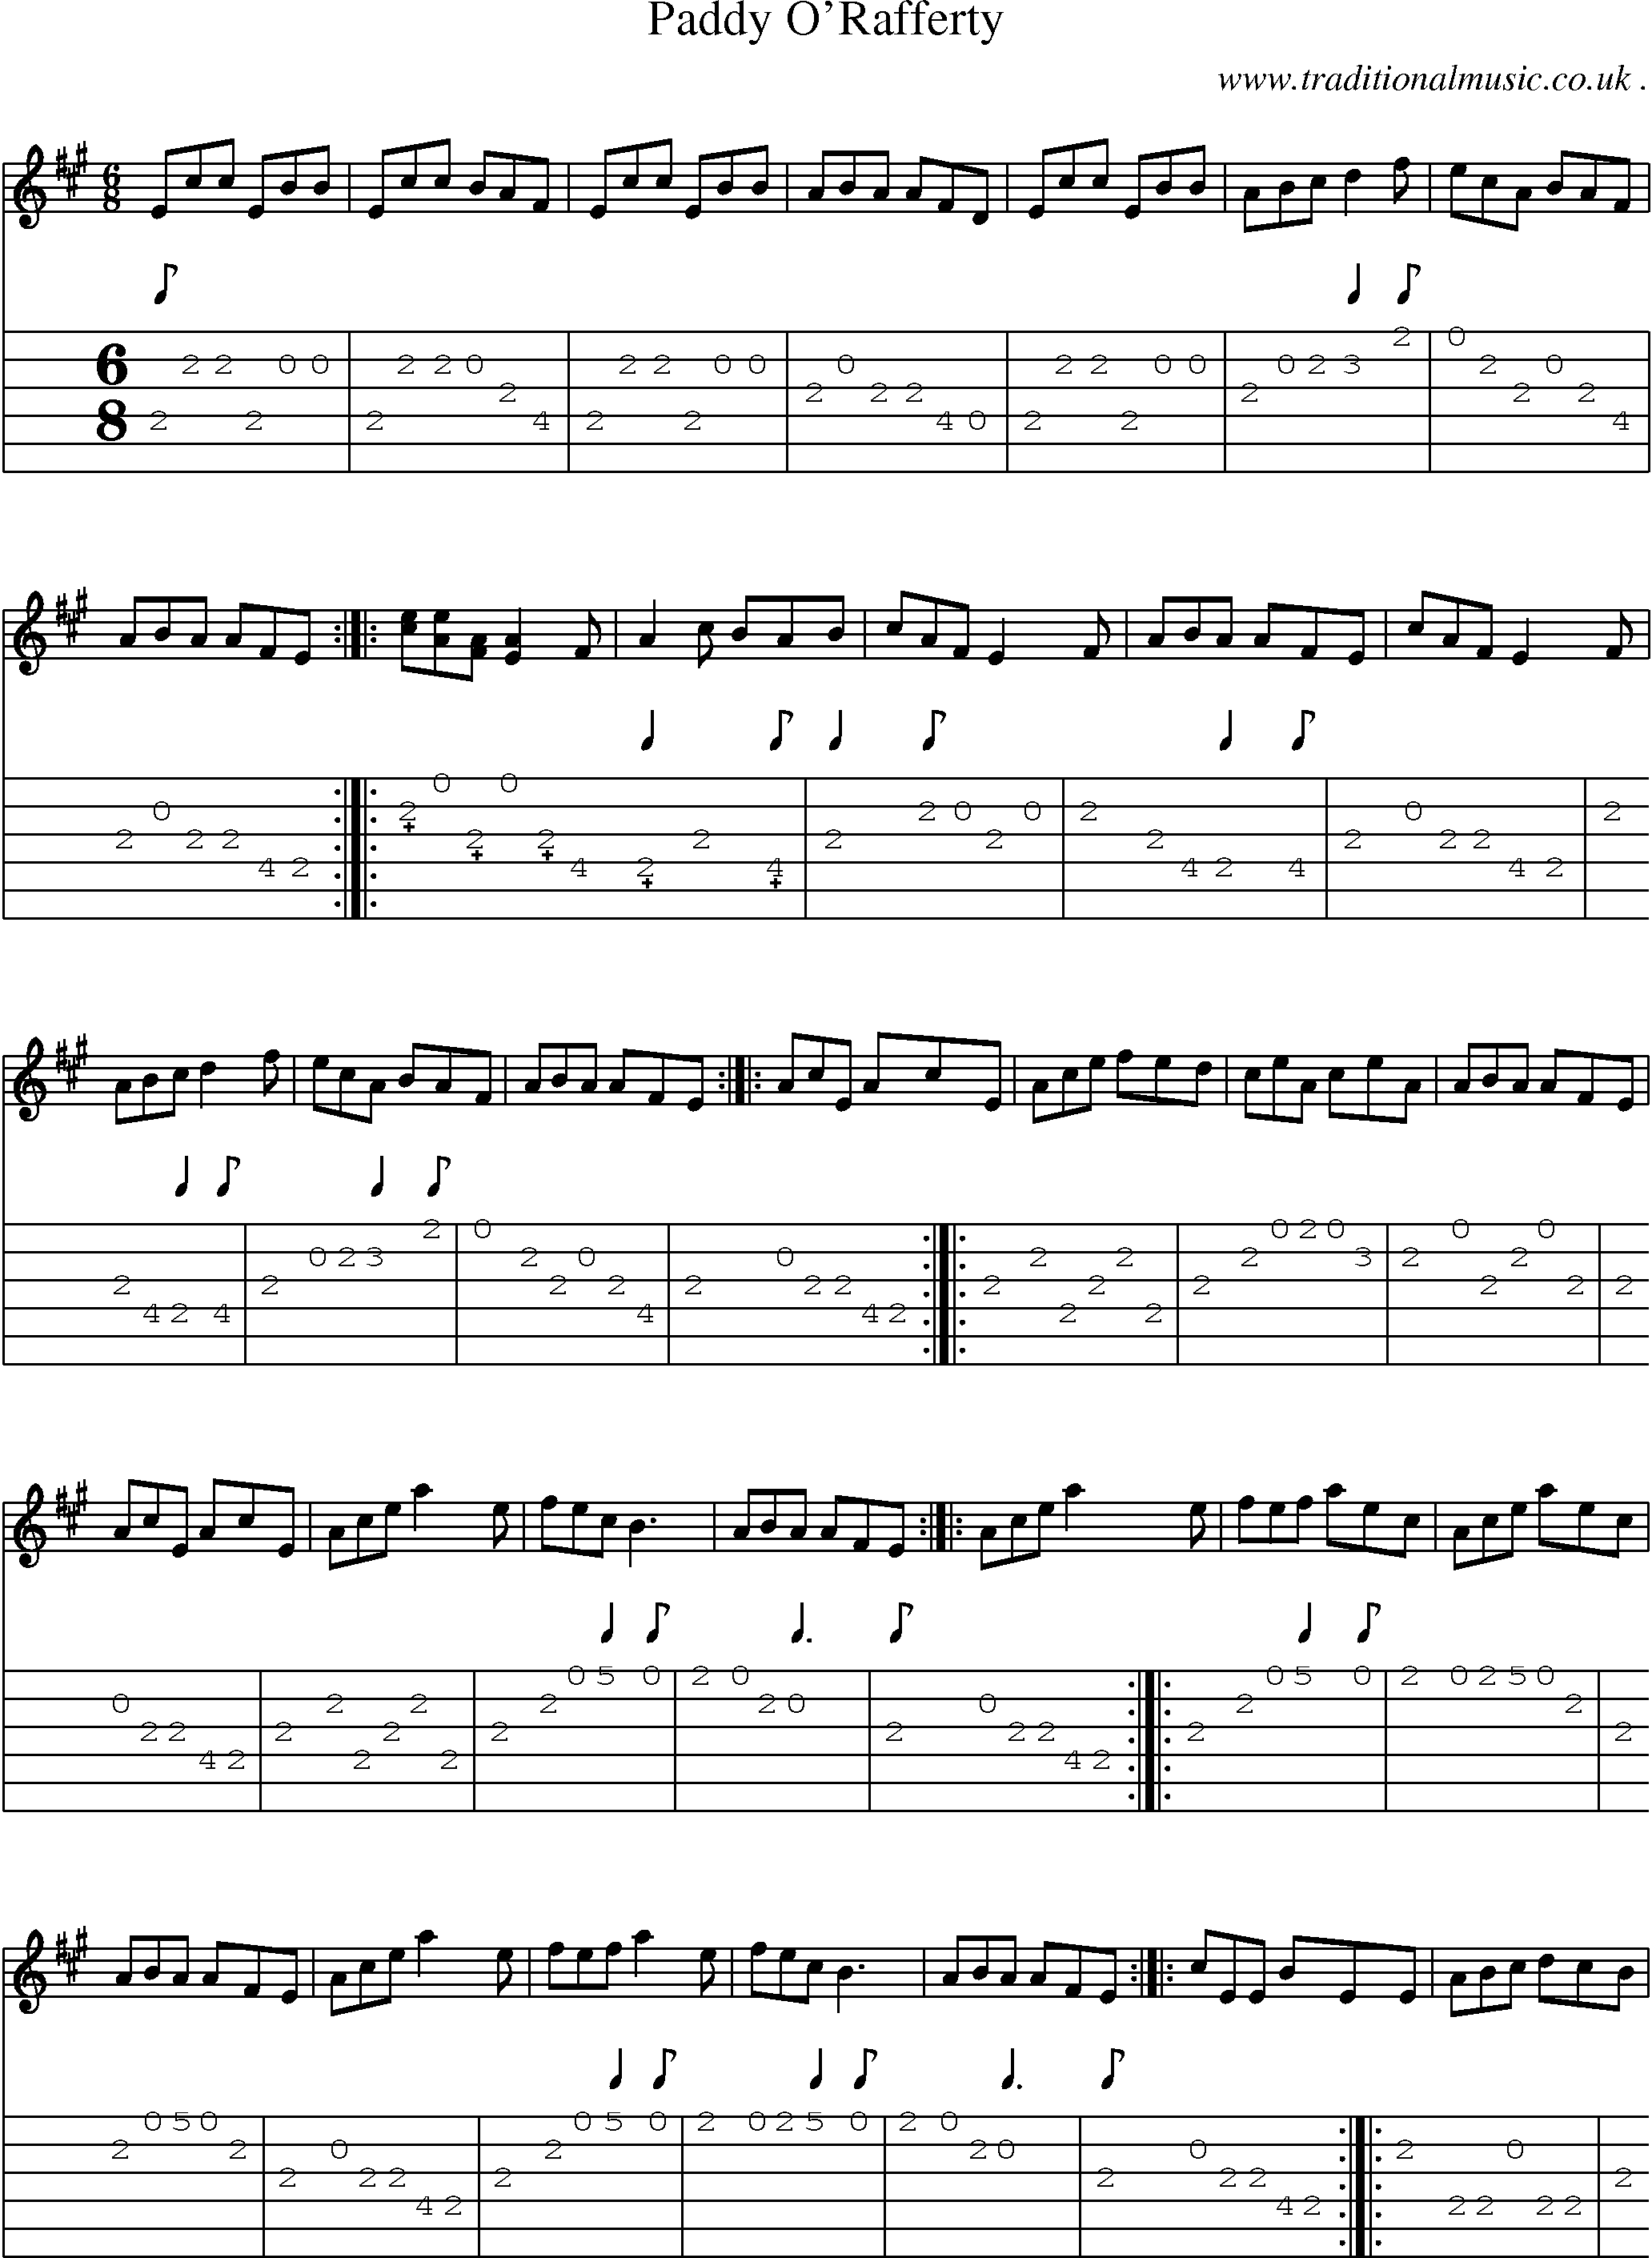 Sheet-Music and Guitar Tabs for Paddy Orafferty